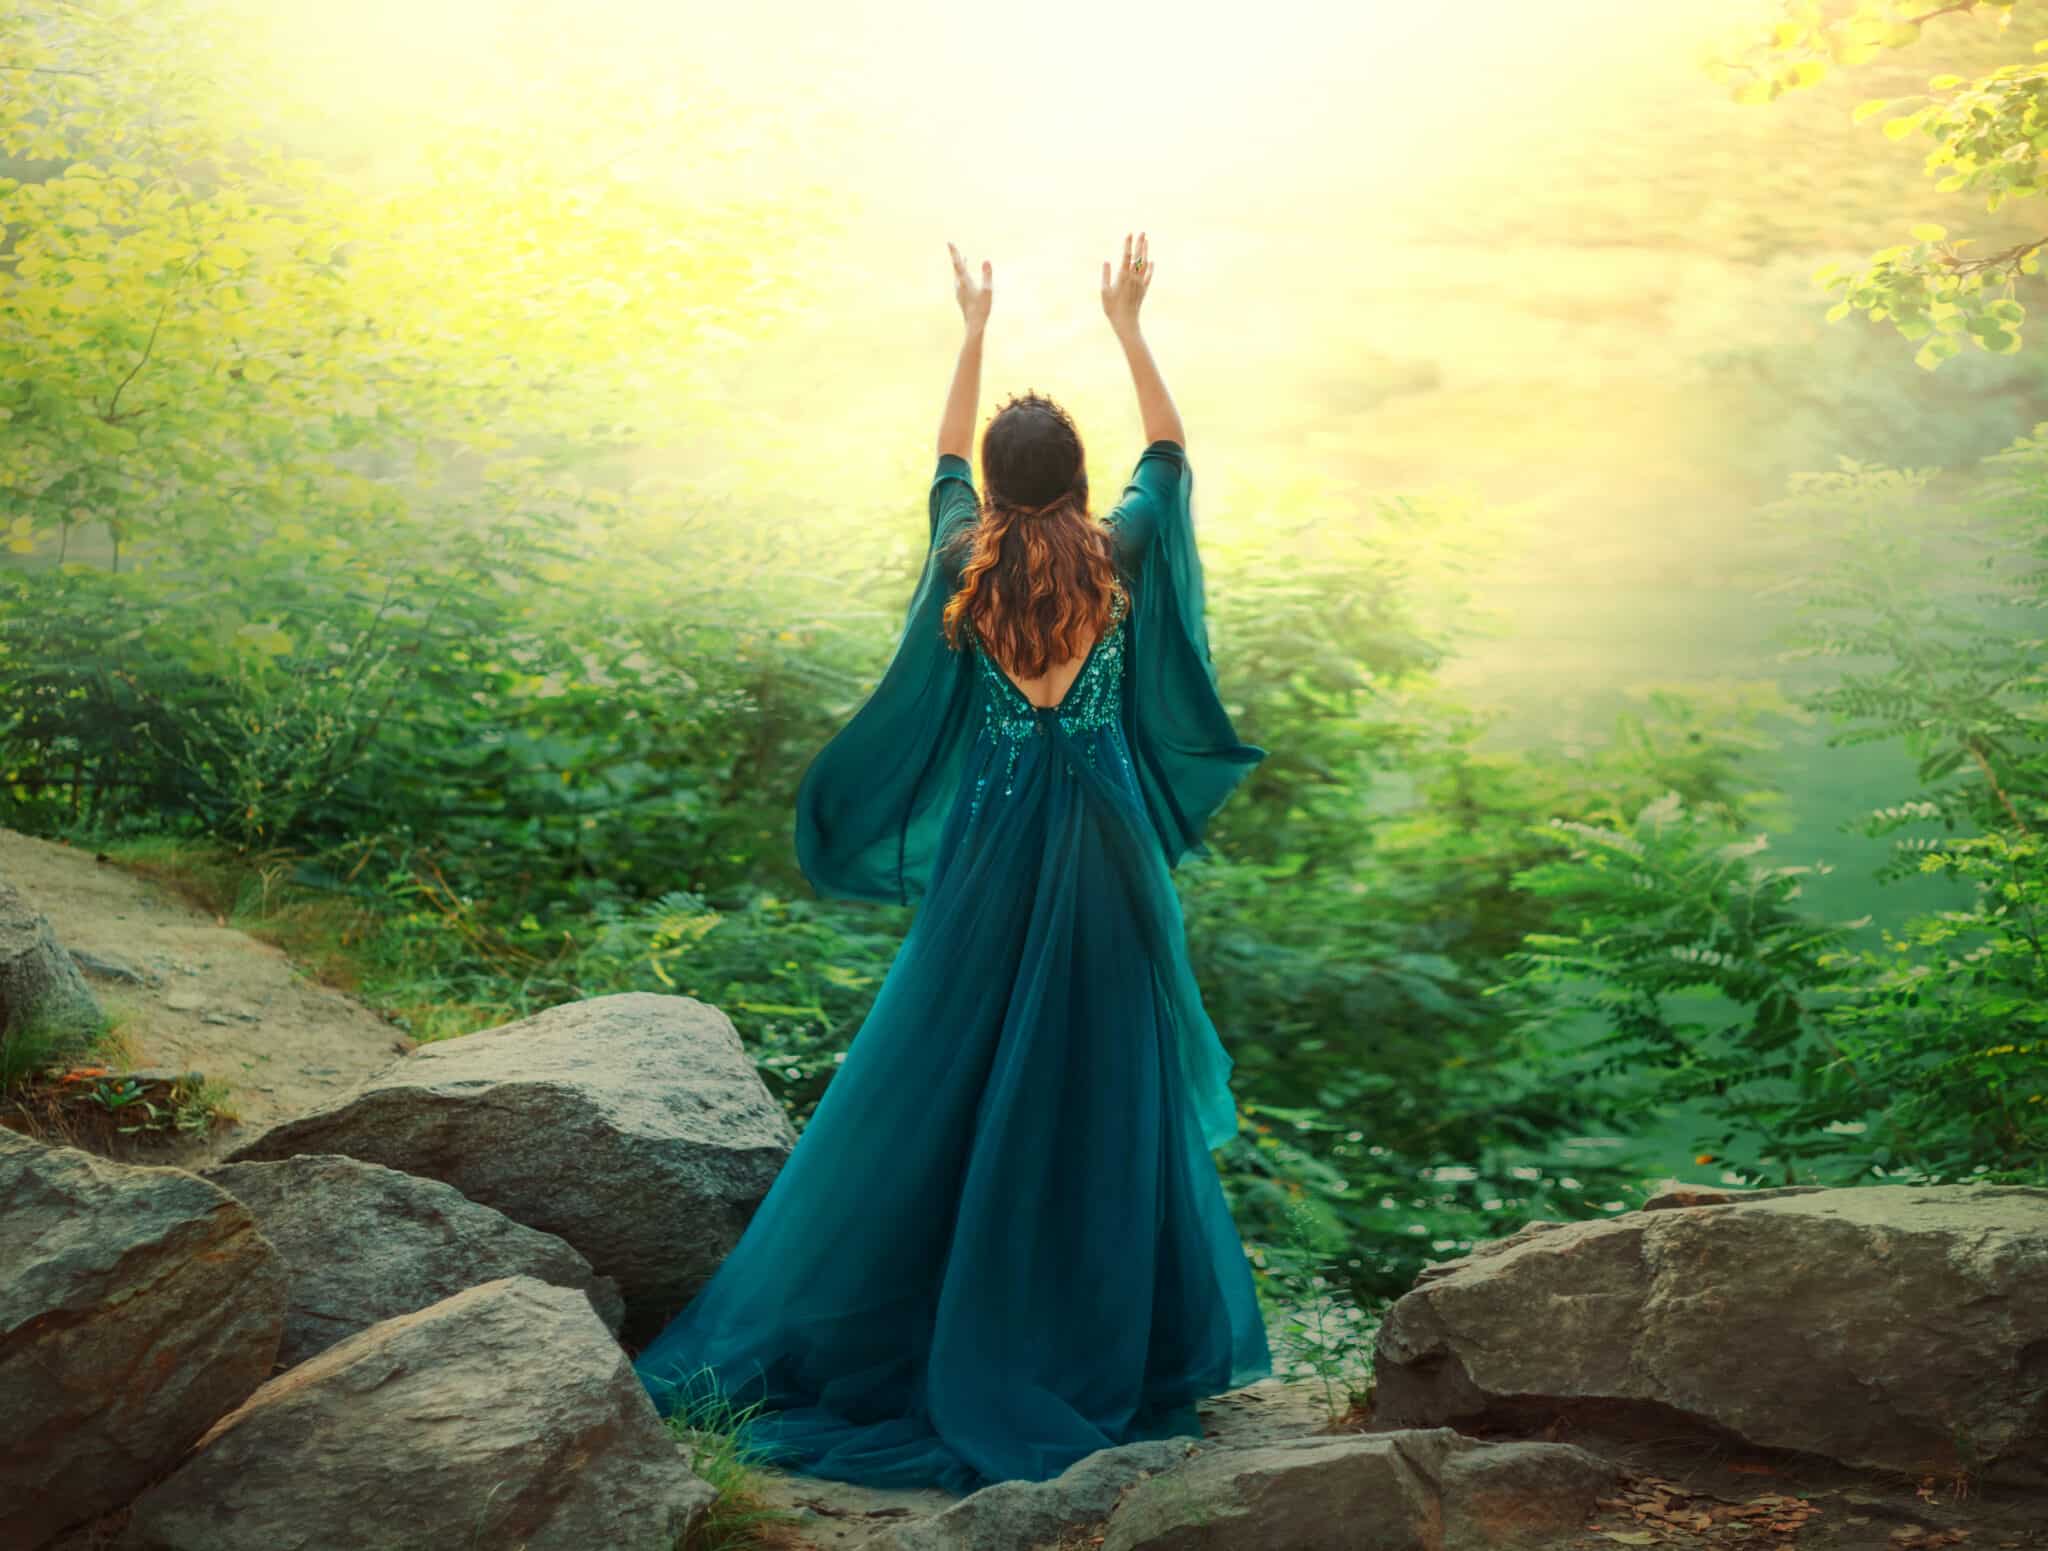 Fantasy woman queen prays in summer forest hands raised to divine magical sun light sky.